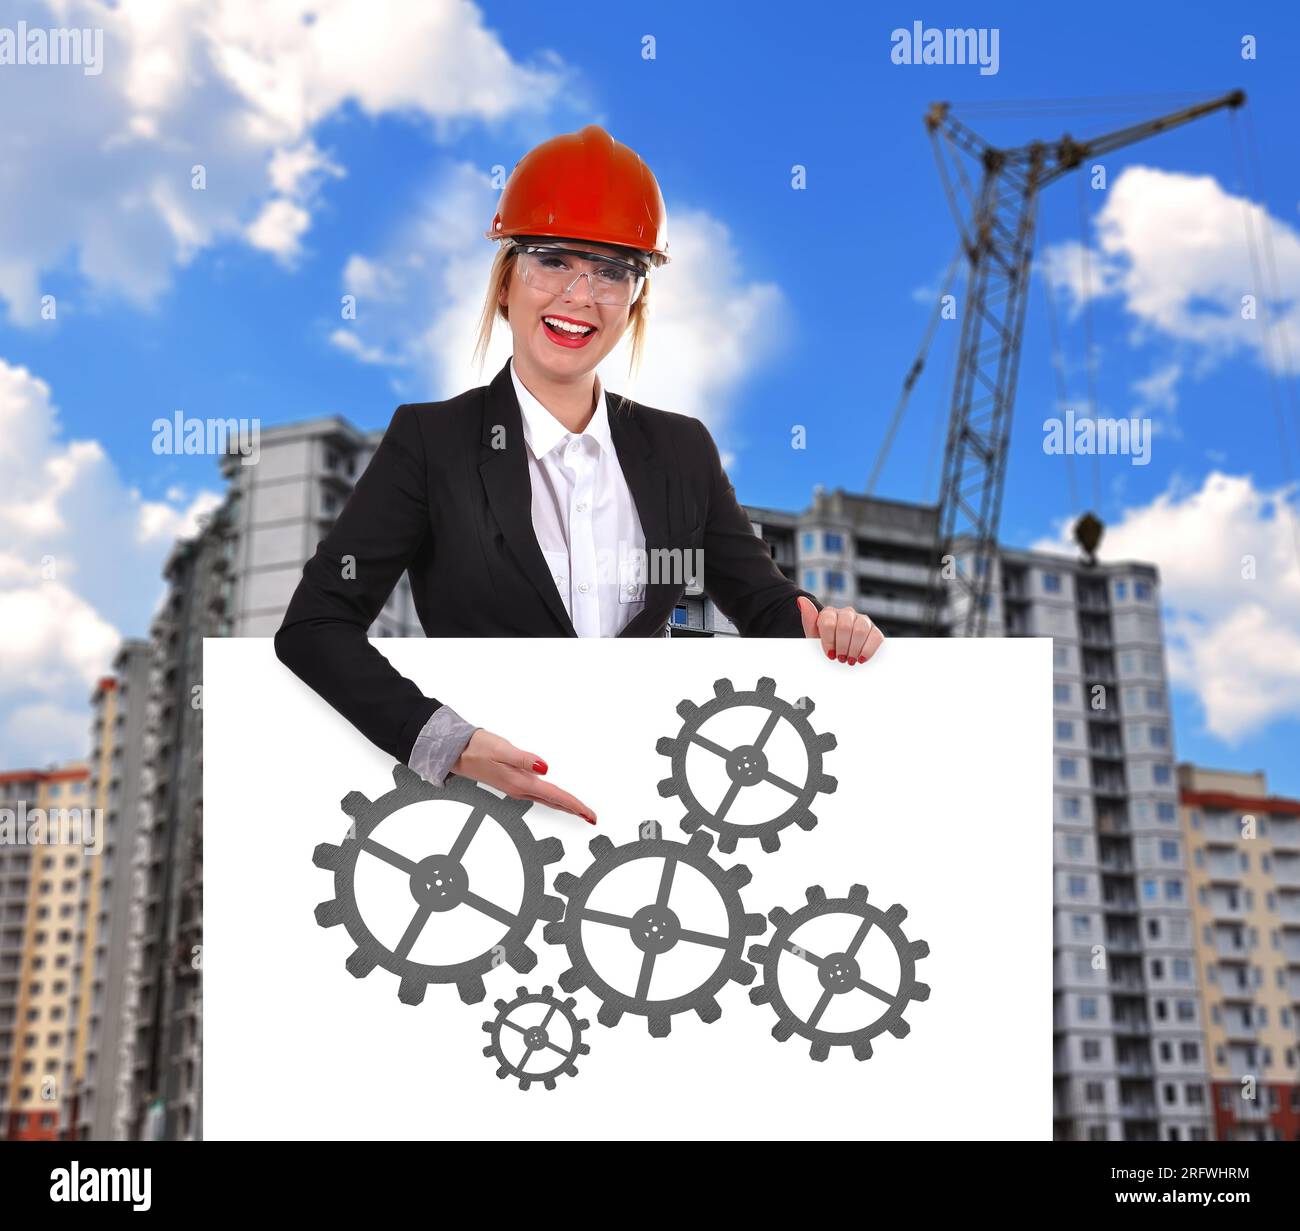 Engineer woman holding placard with cogs and wheels Stock Photo